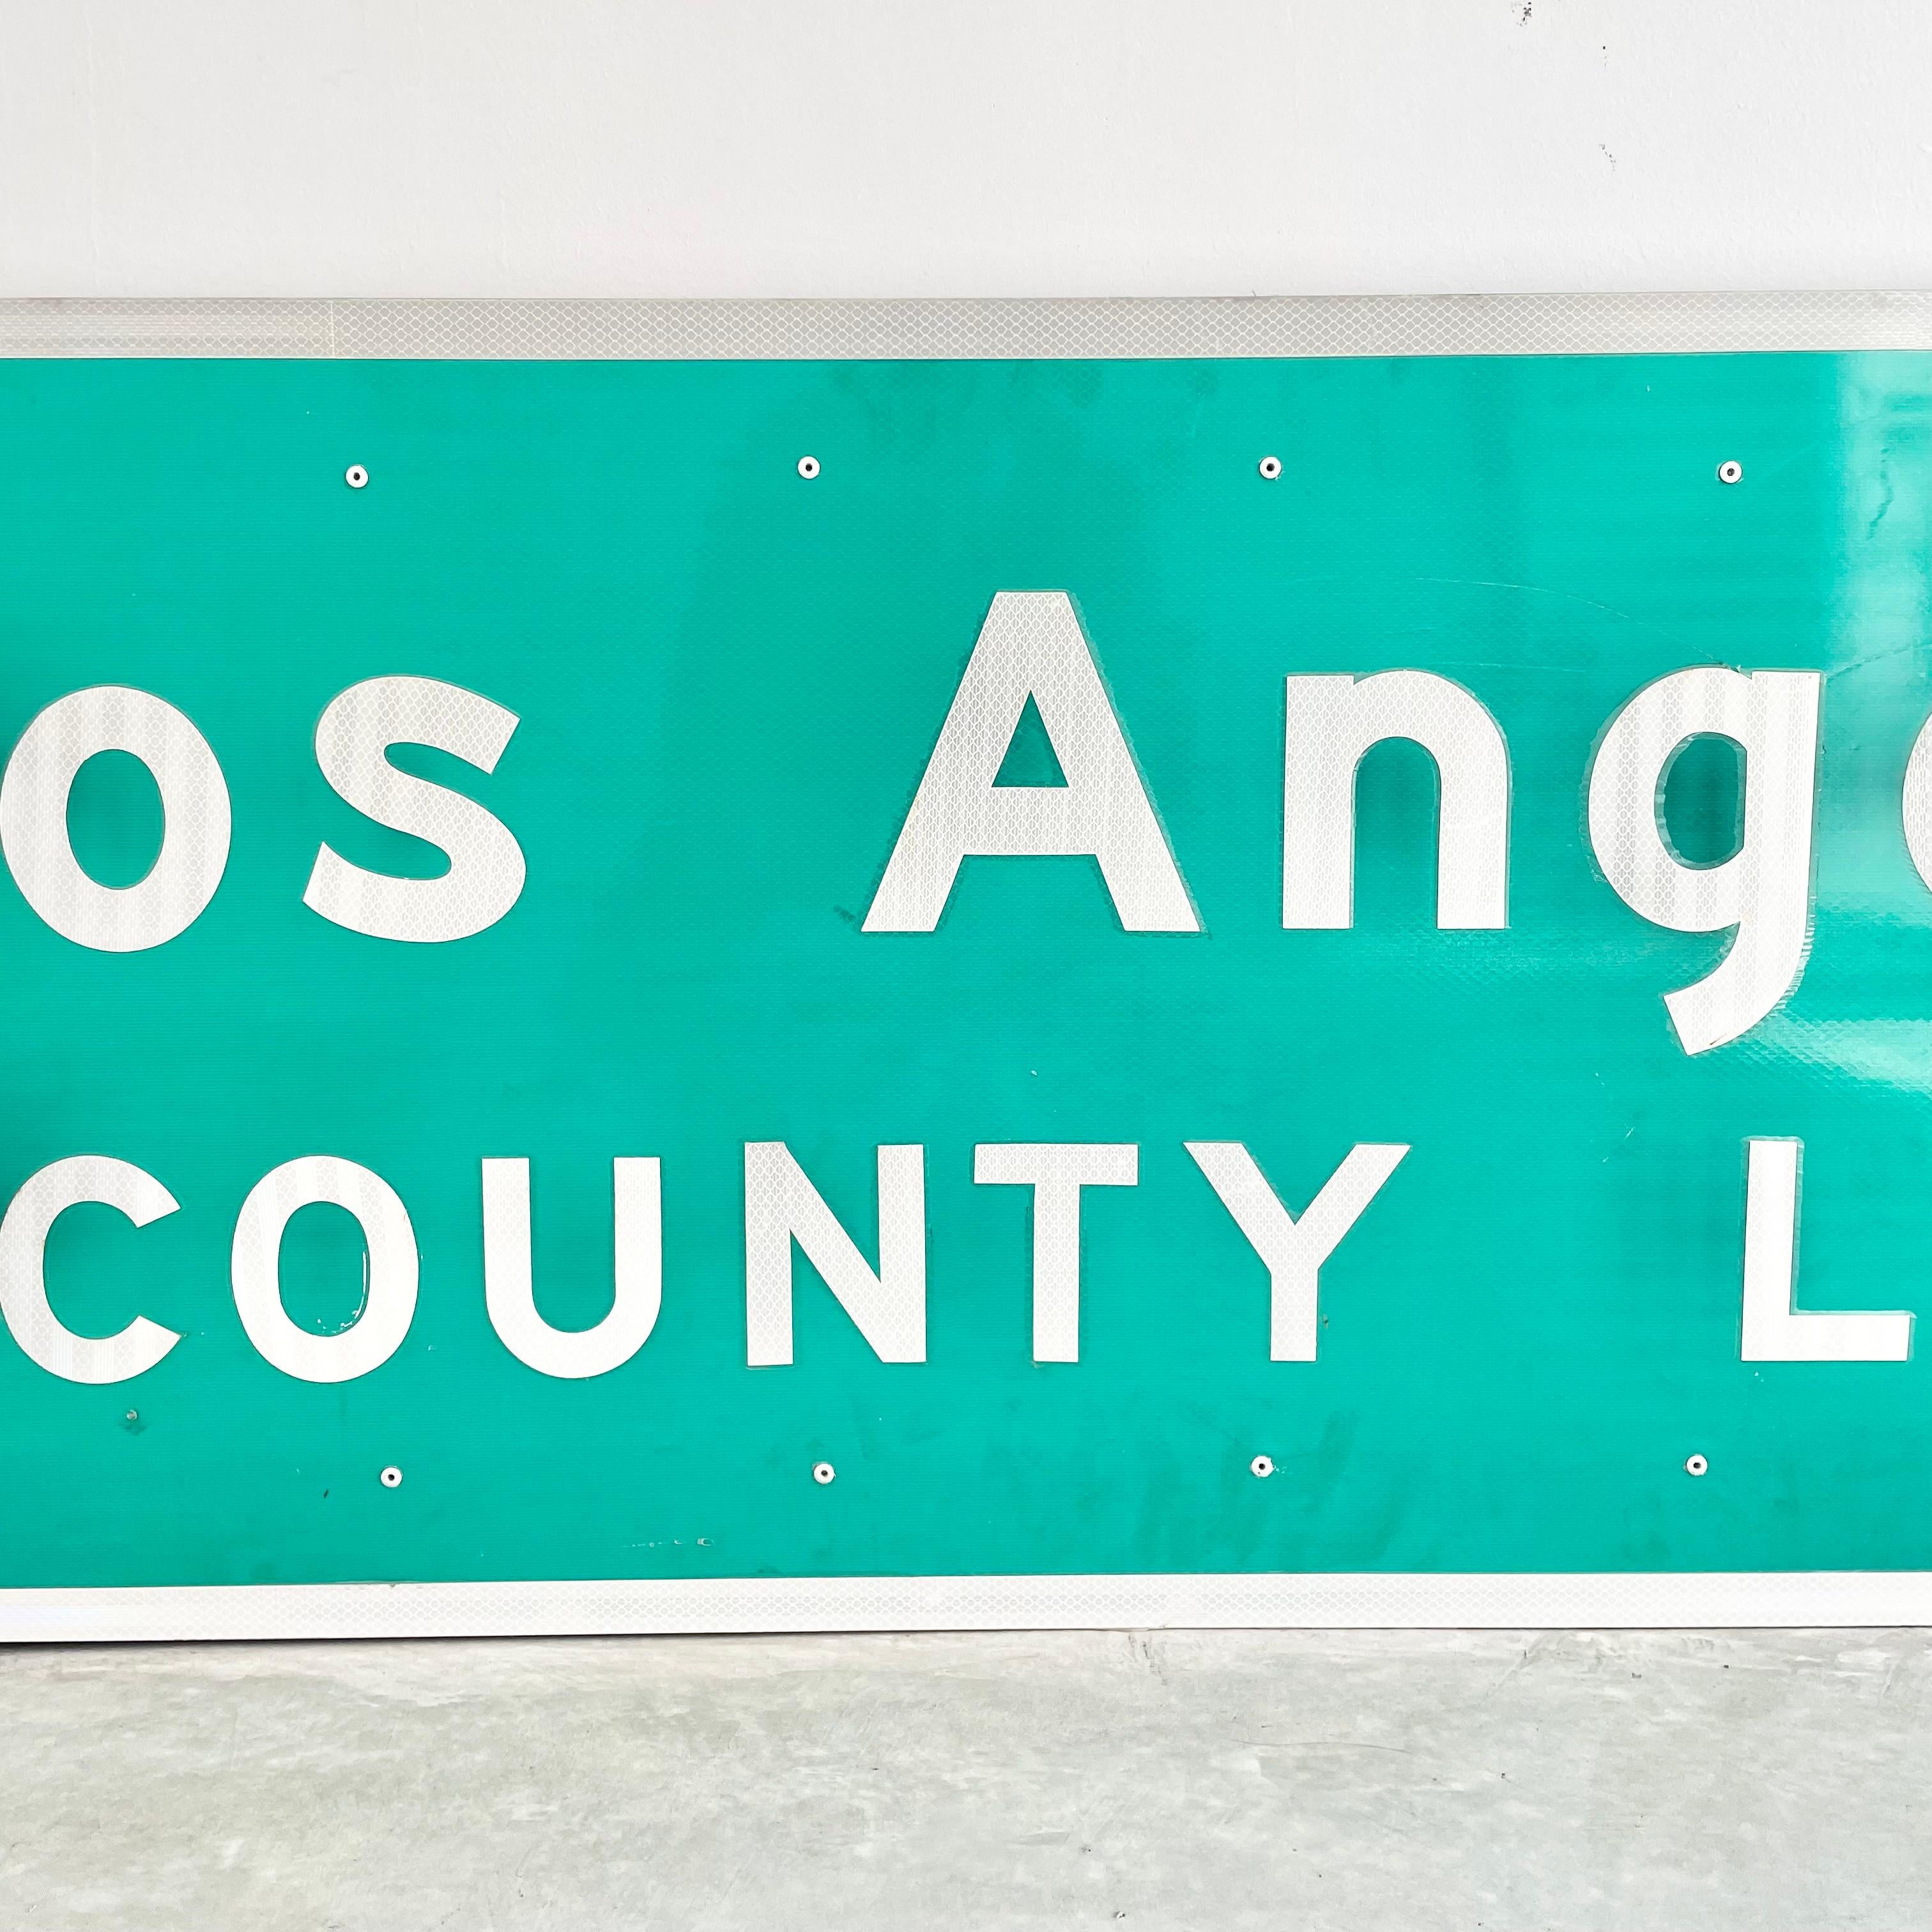 los angeles county limits